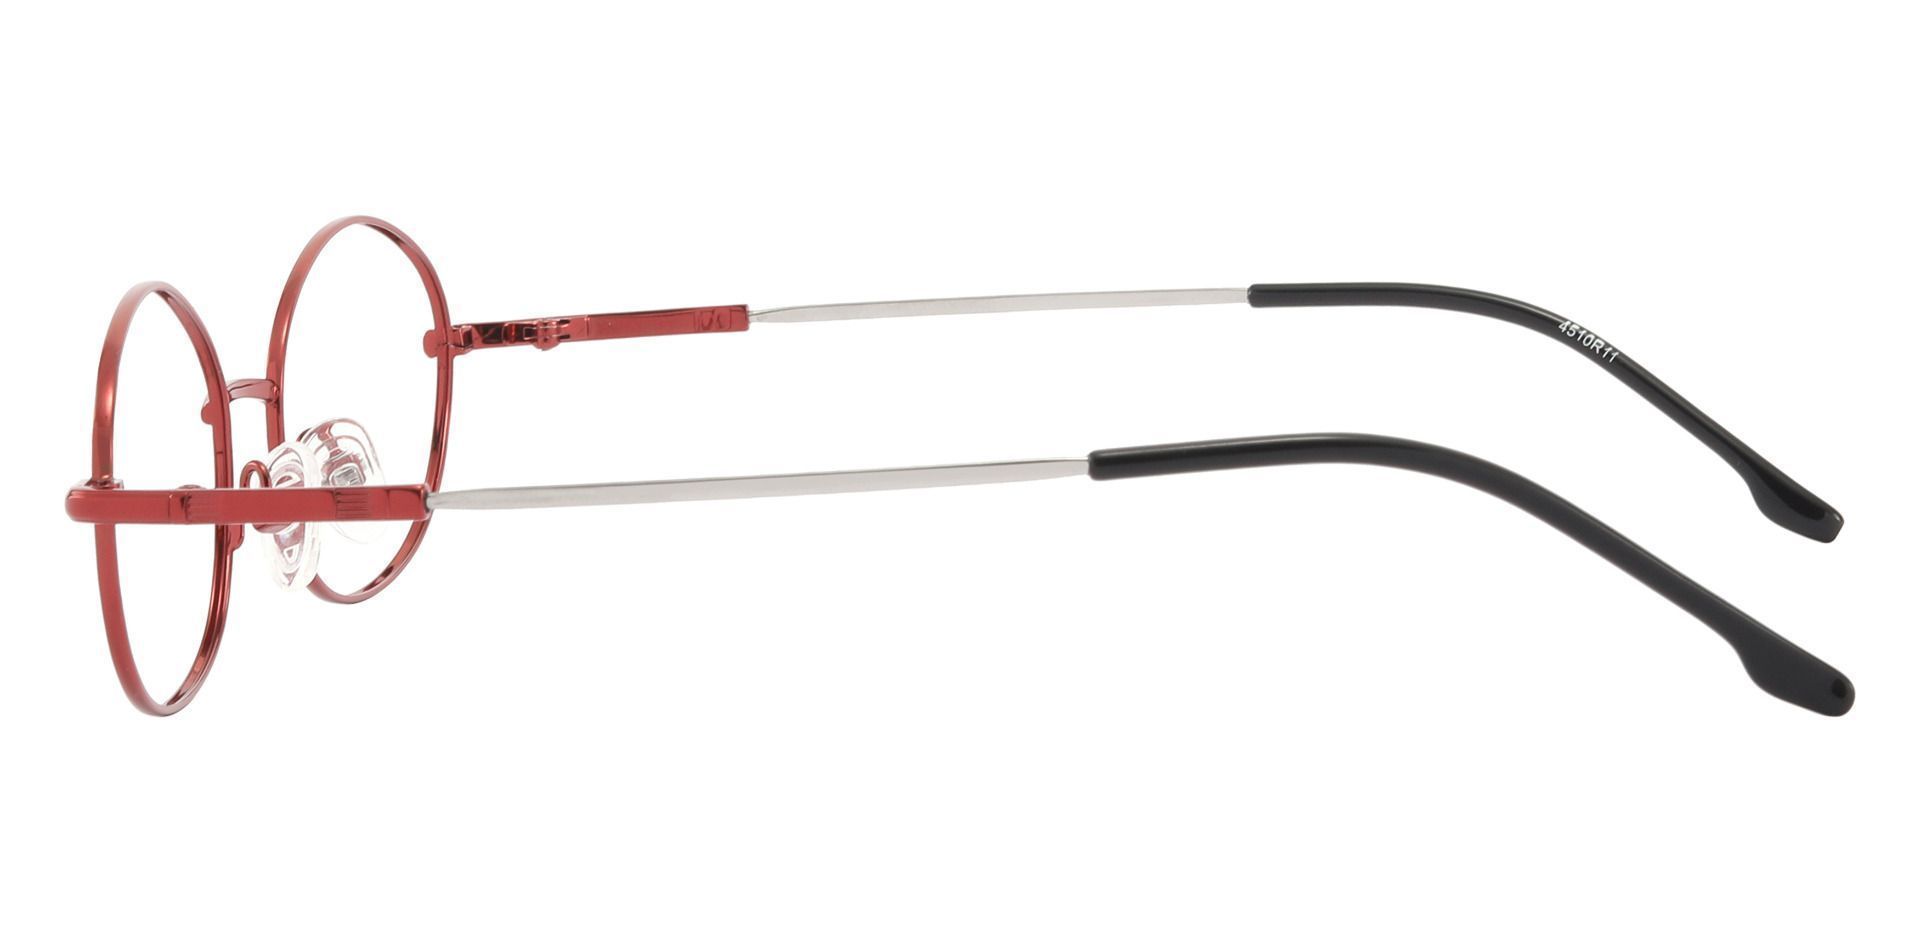 Calera Oval Reading Glasses - Red